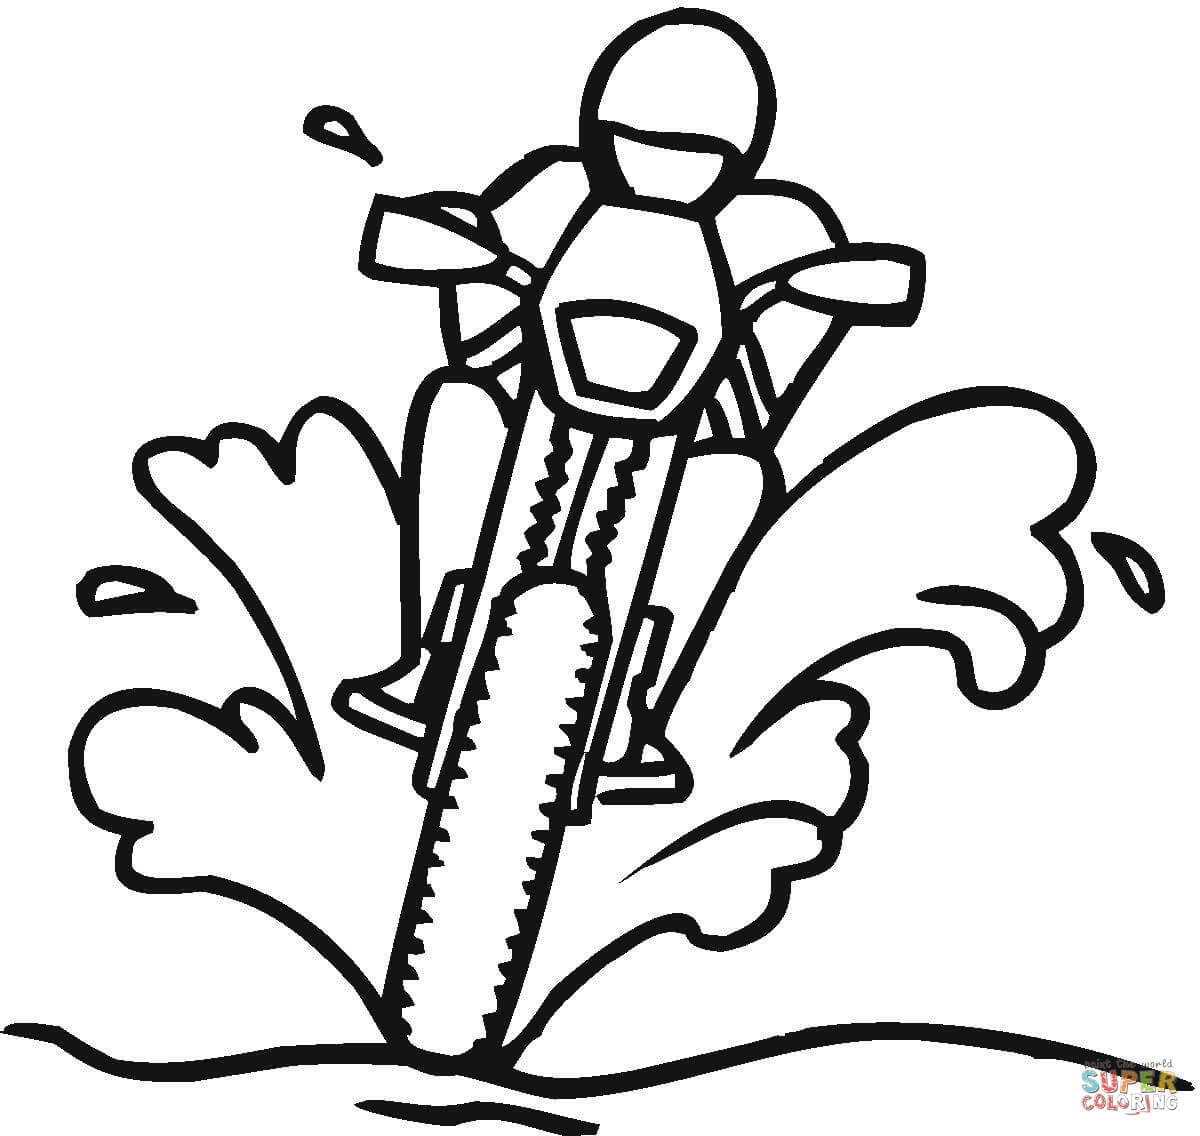 Racing On The Dirty Road coloring page | Free Printable Coloring Pages